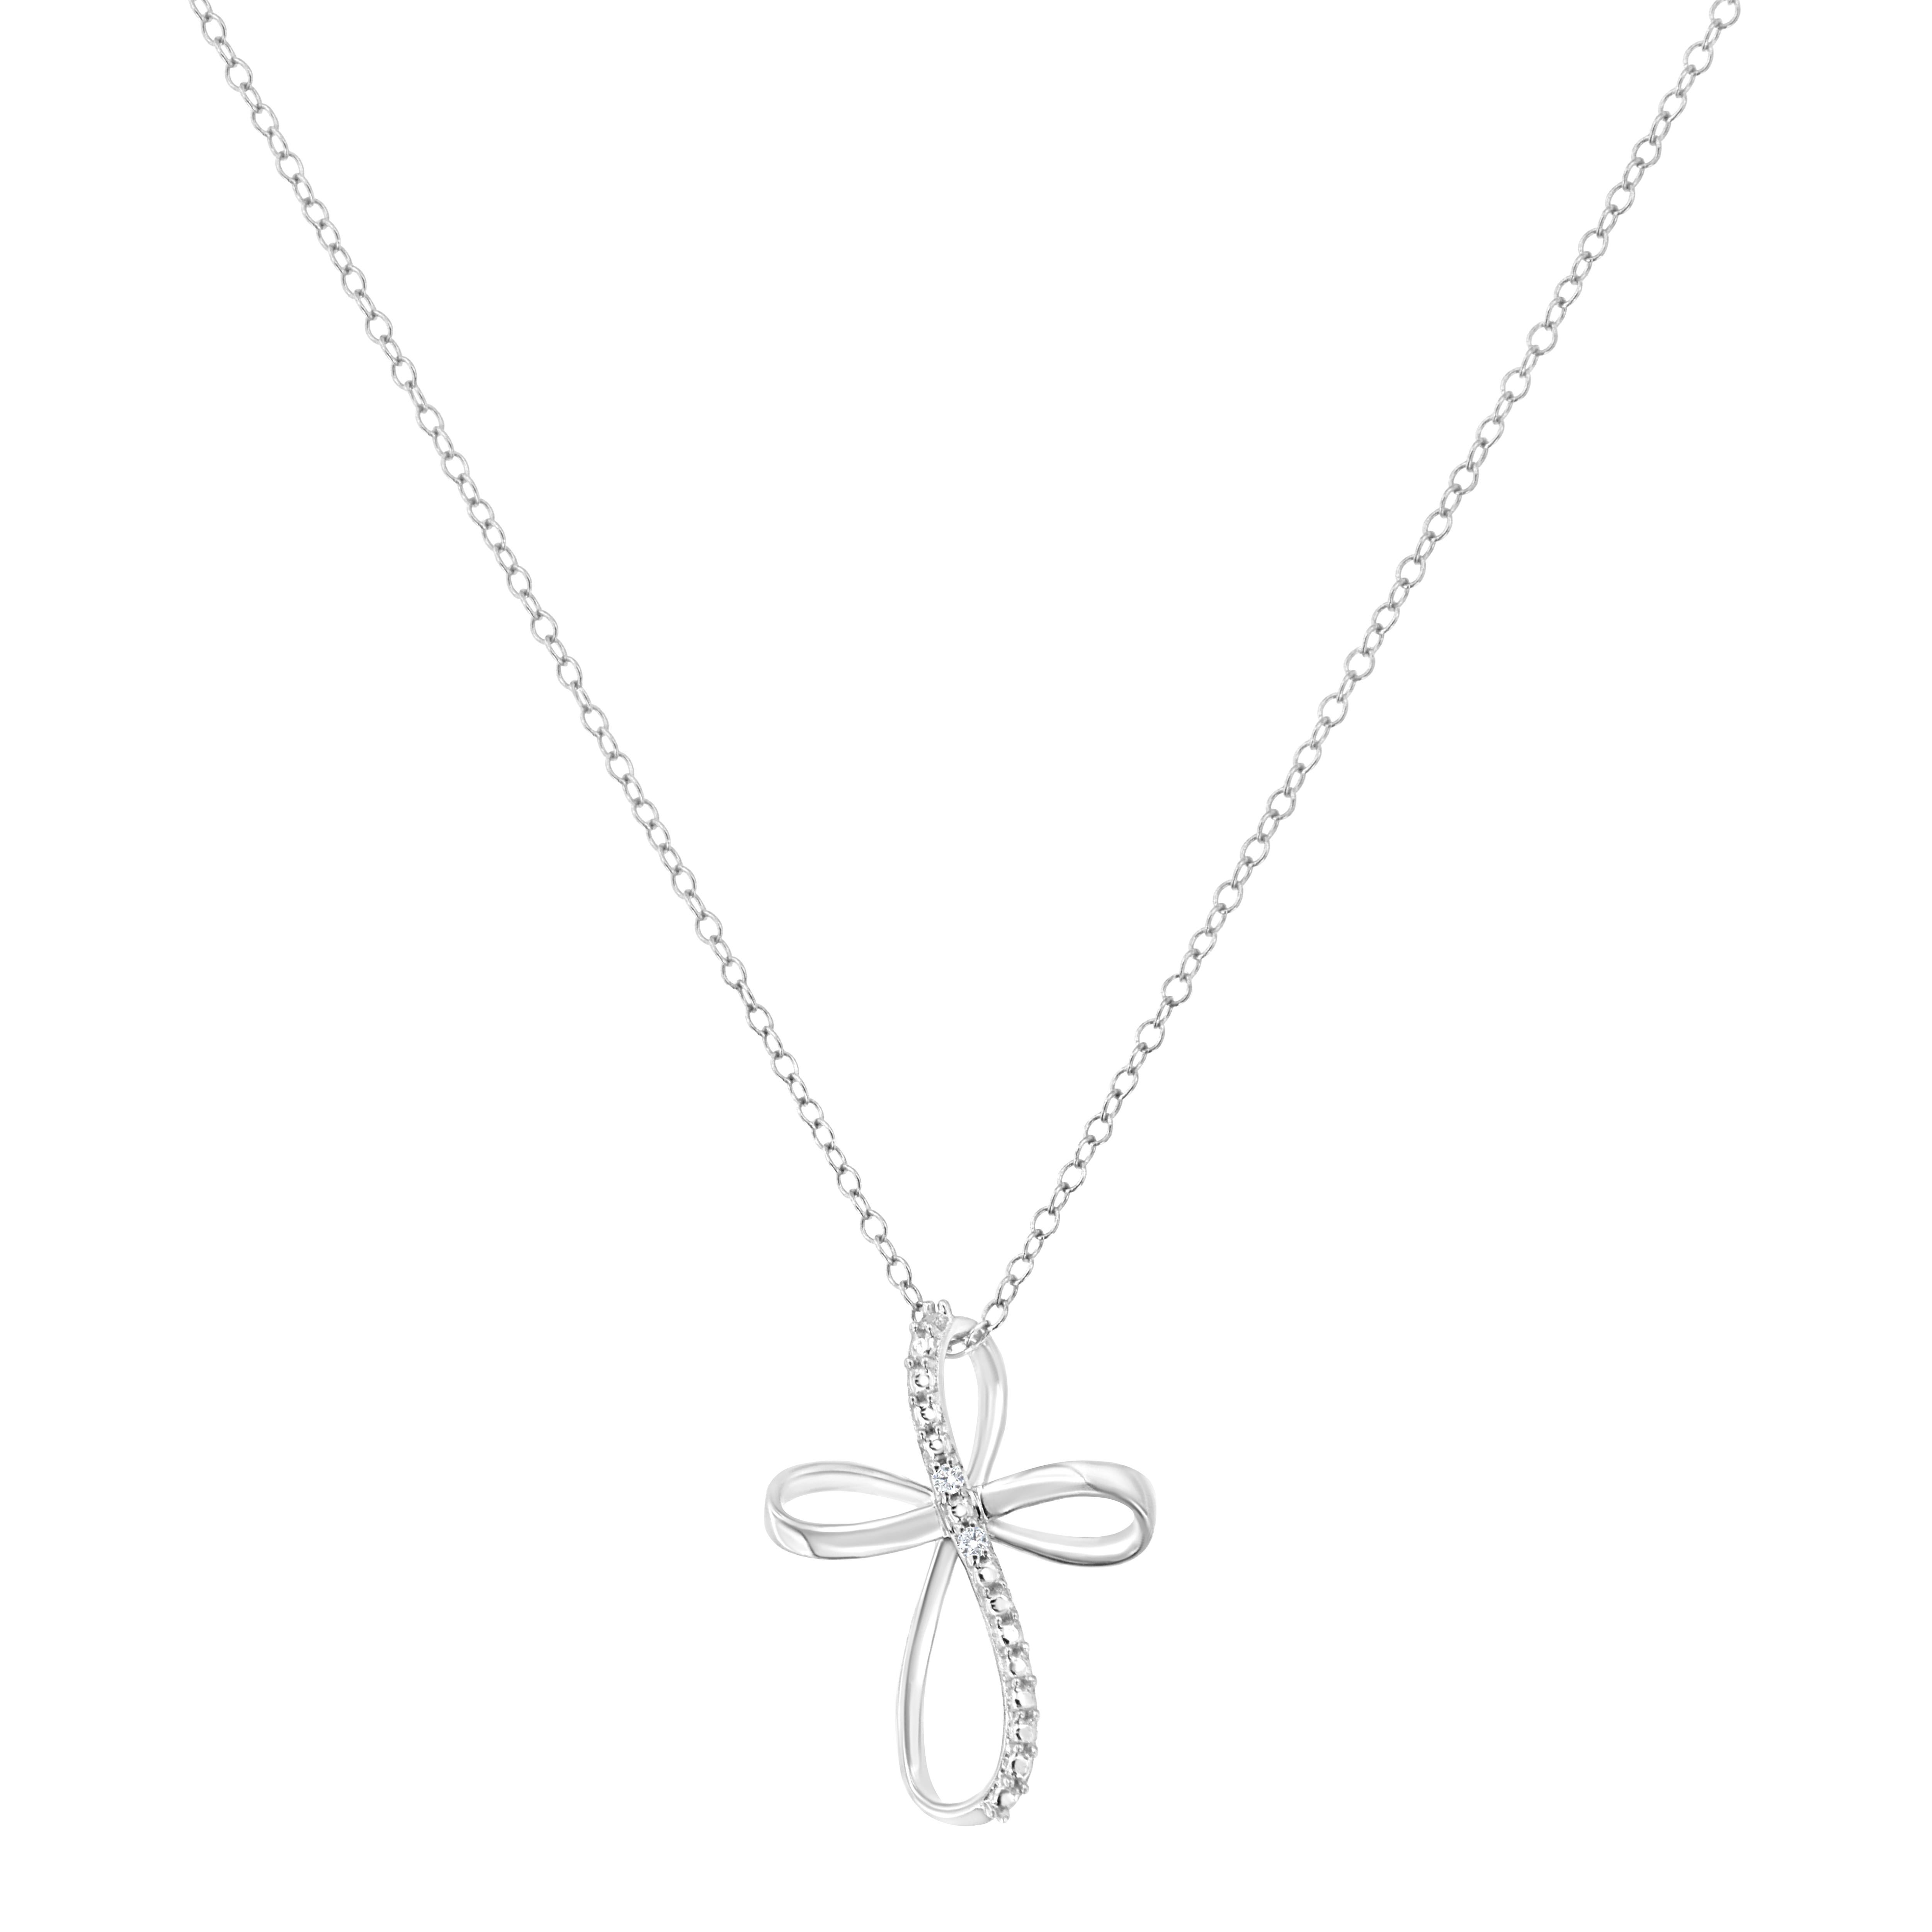 Show off your faith with this .925 sterling silver ribbon cross pendant. The cross shaped pendant crafted with warm weaves of white rhodiumed sterling silver and is accented with 2 natural, round, diamonds, .The pendant comes on a fine sterling